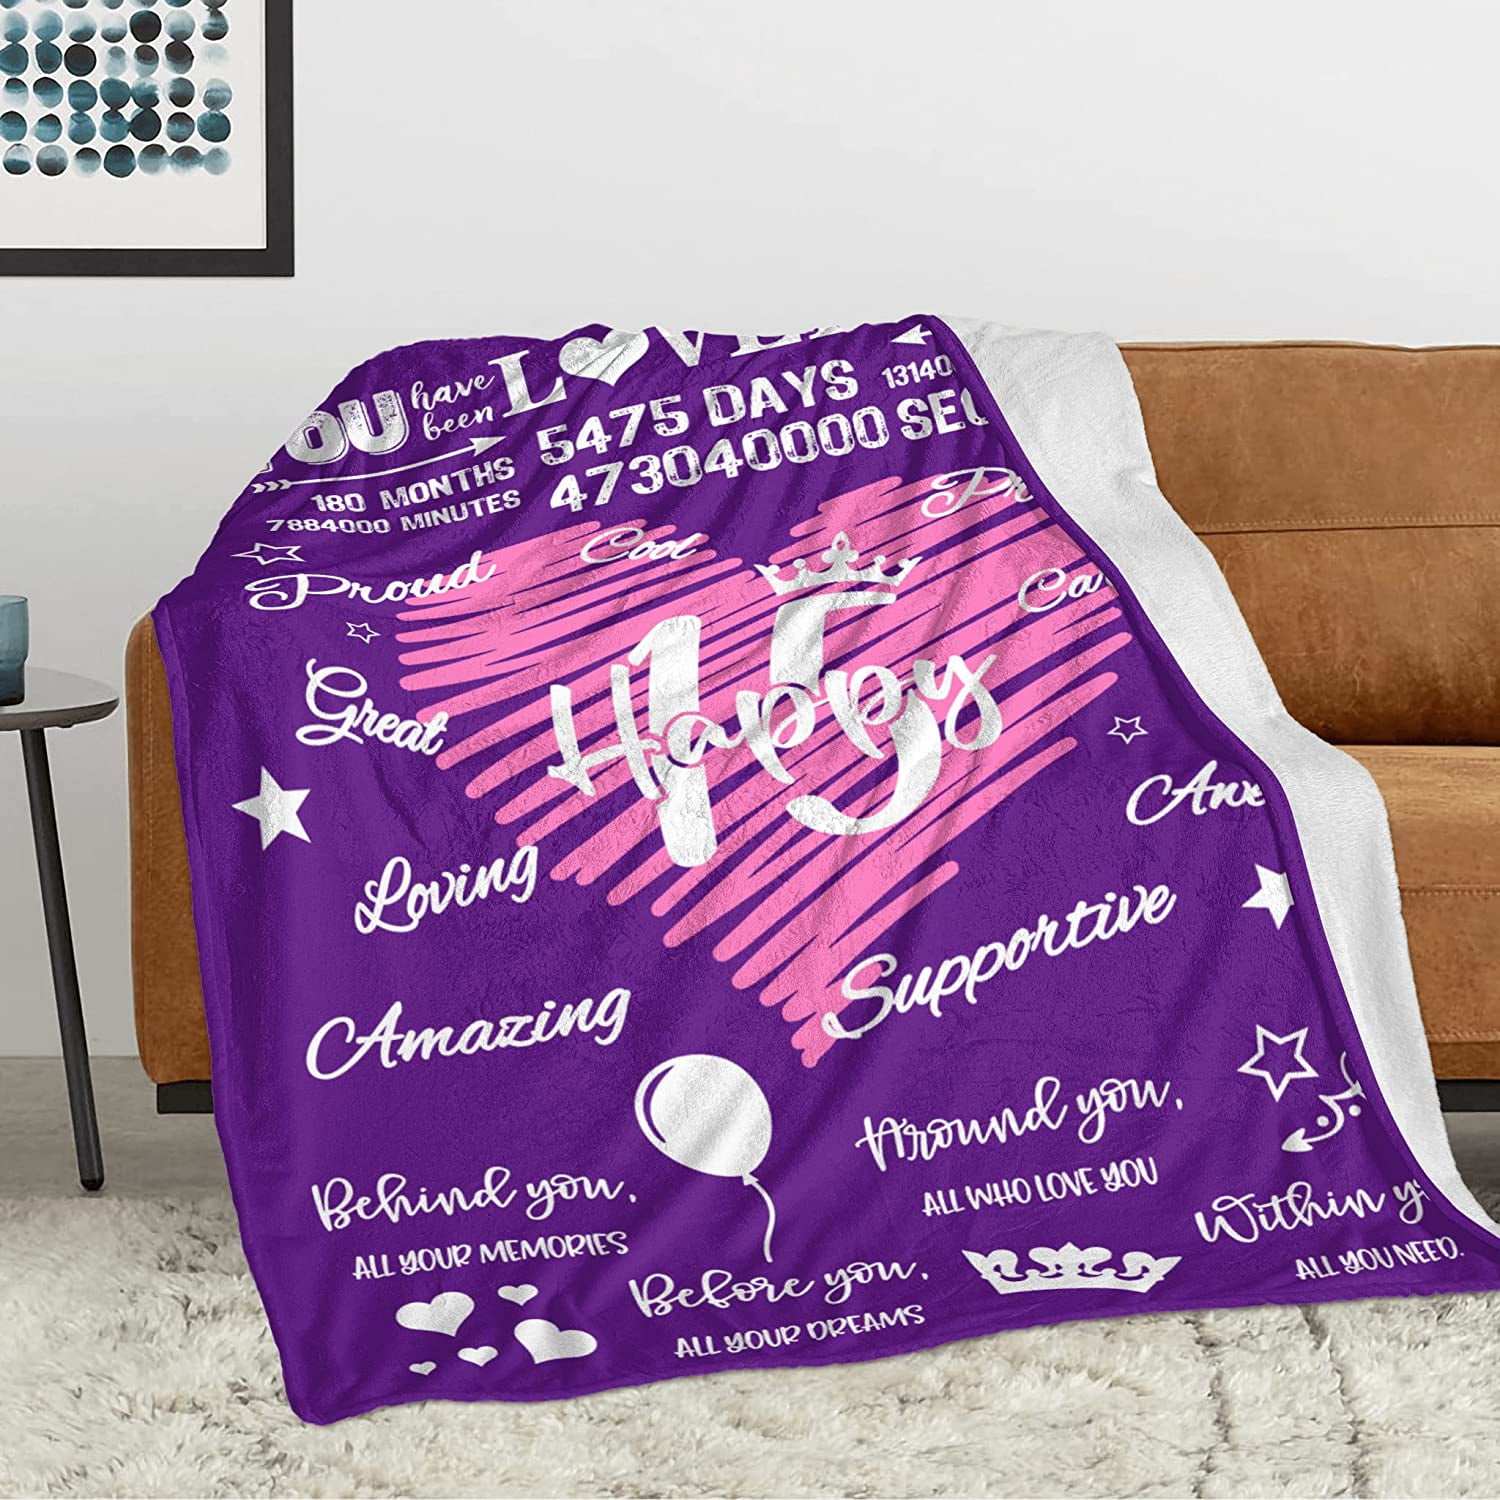 15 Year Old Girls Gifts for Birthday You are Braver Than You Believe Strong  Than You Seem Inspirational Unique 15th Birthday Gift Ideas for Teen Girl